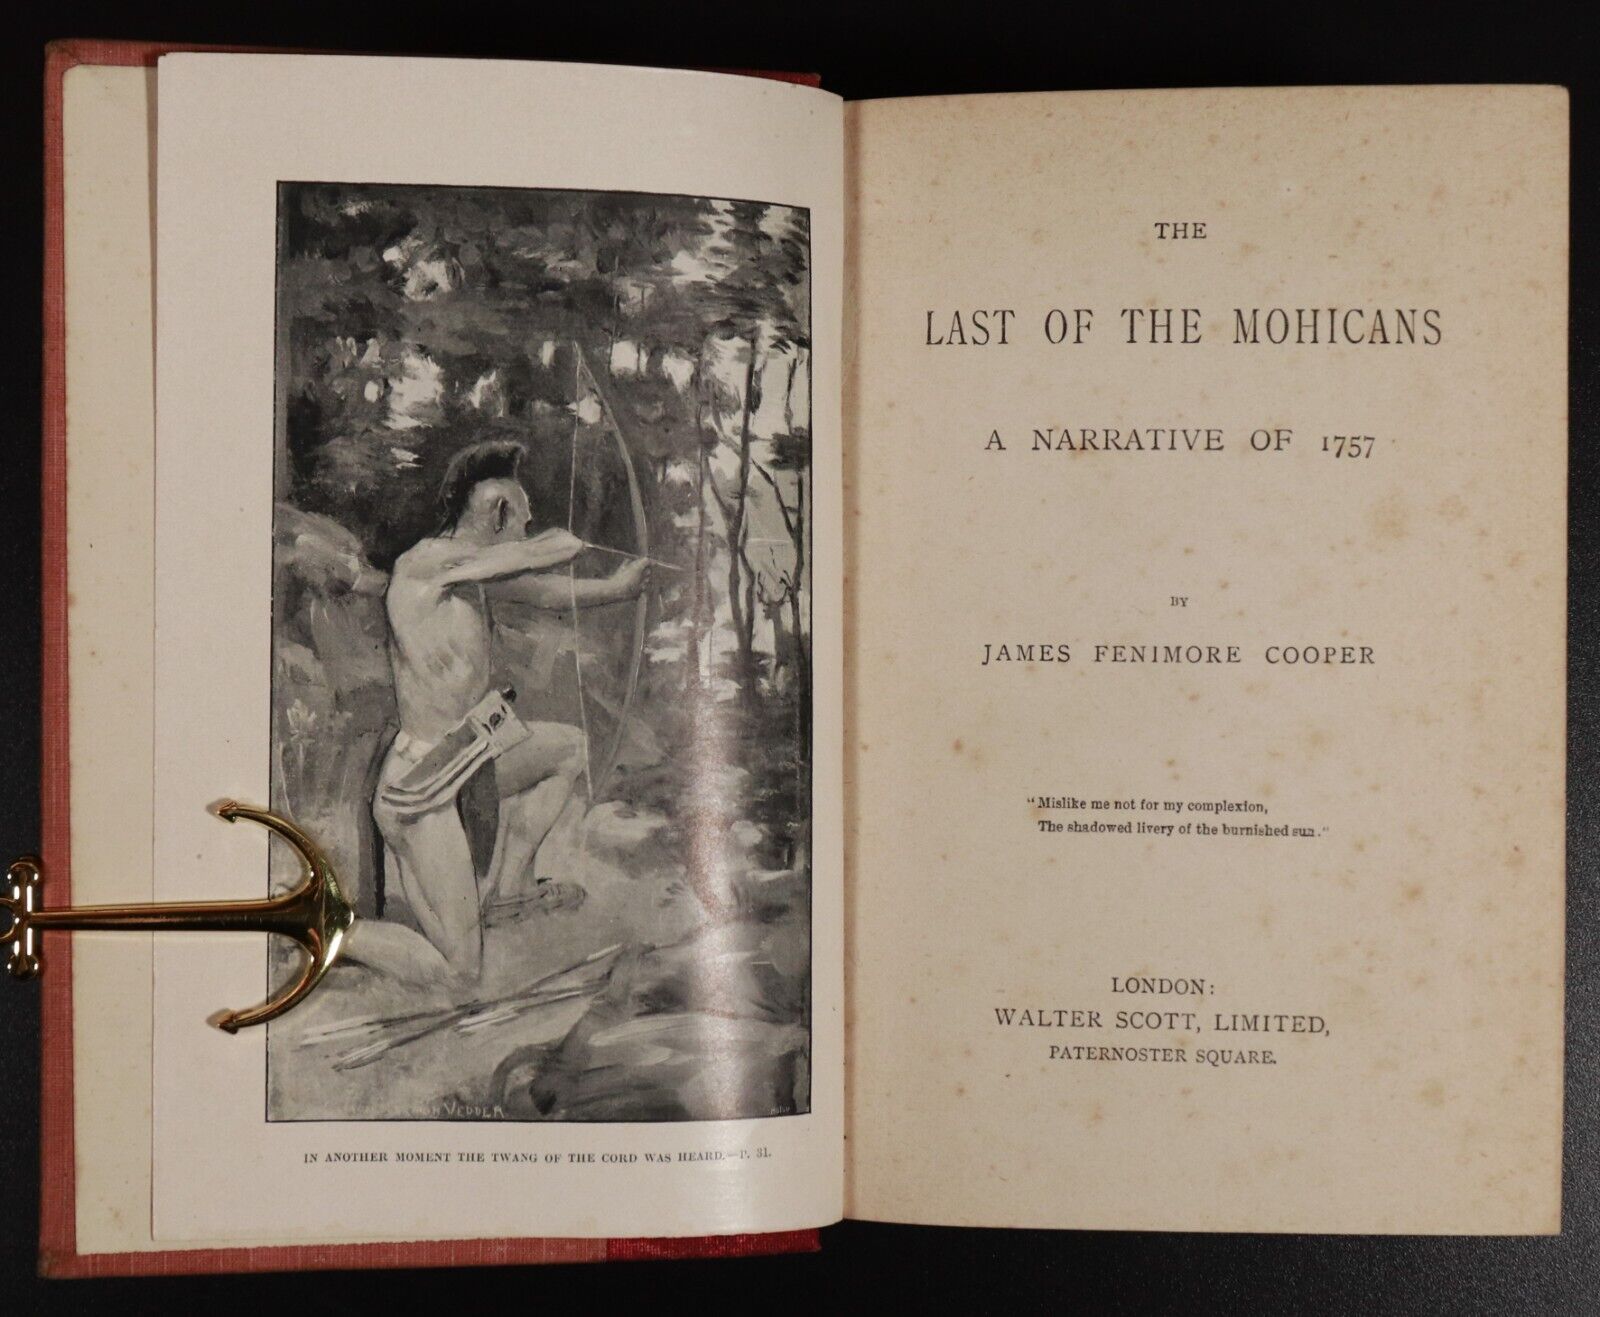 c1897 The Last Of The Mohicans by J.F. Cooper Antique American Fiction Book - 0